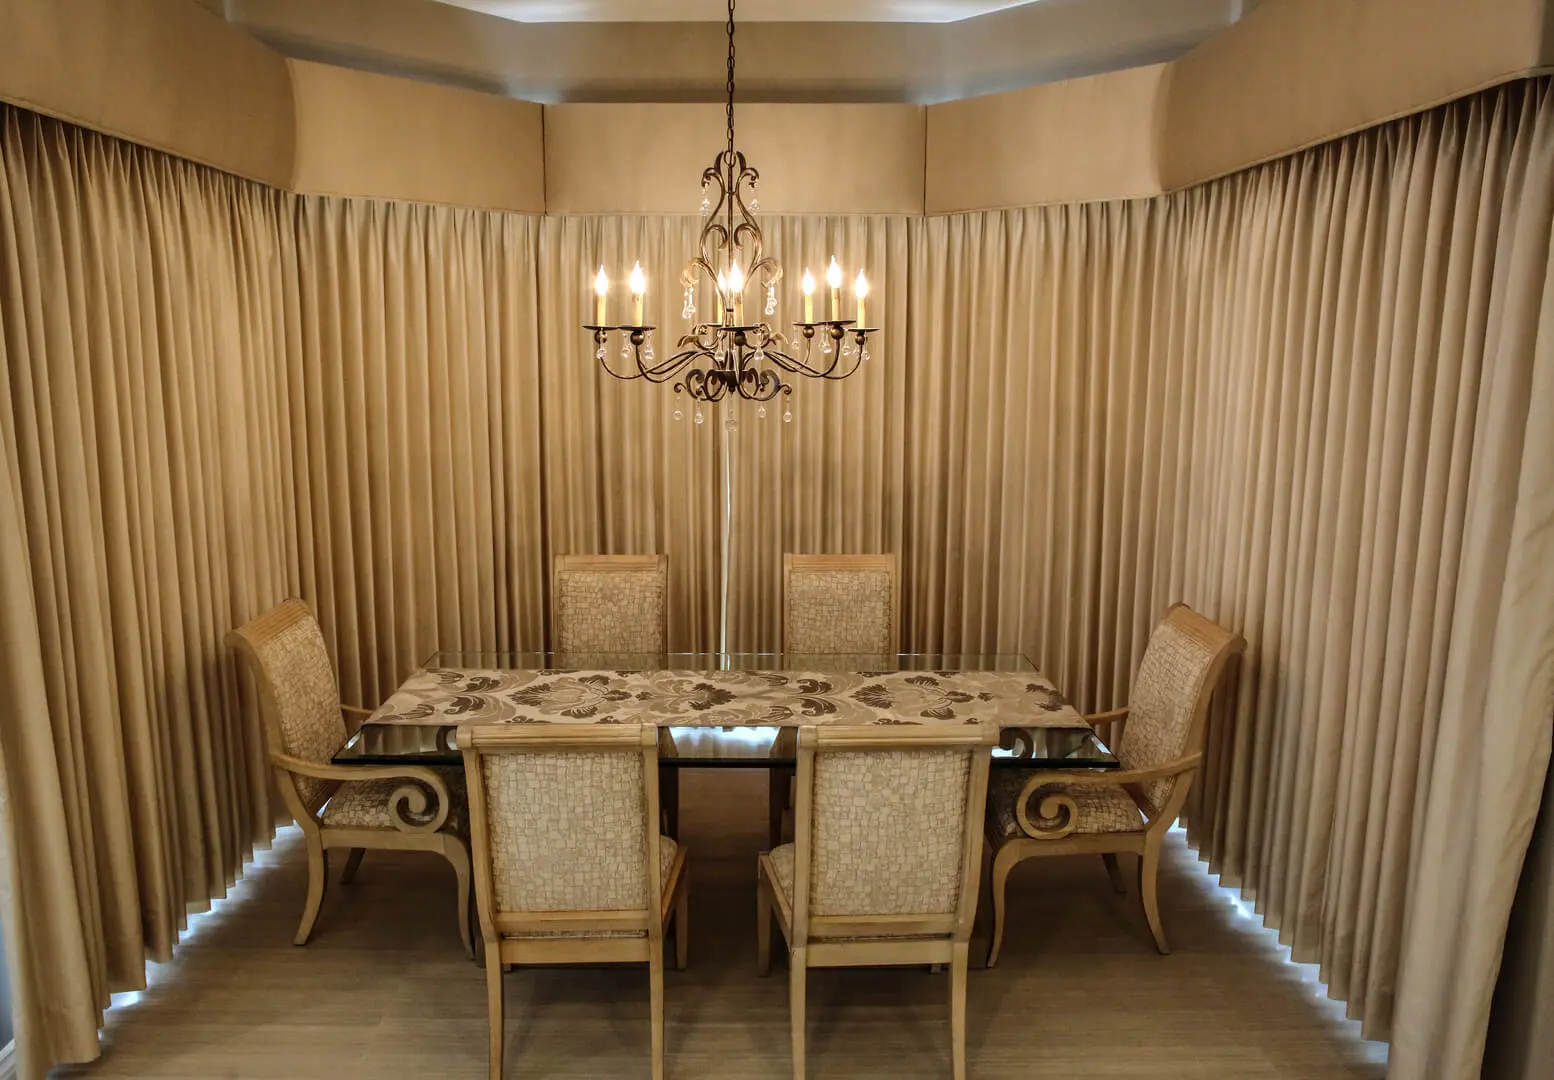 A dining room with a table and chairs, chandelier and curtains.